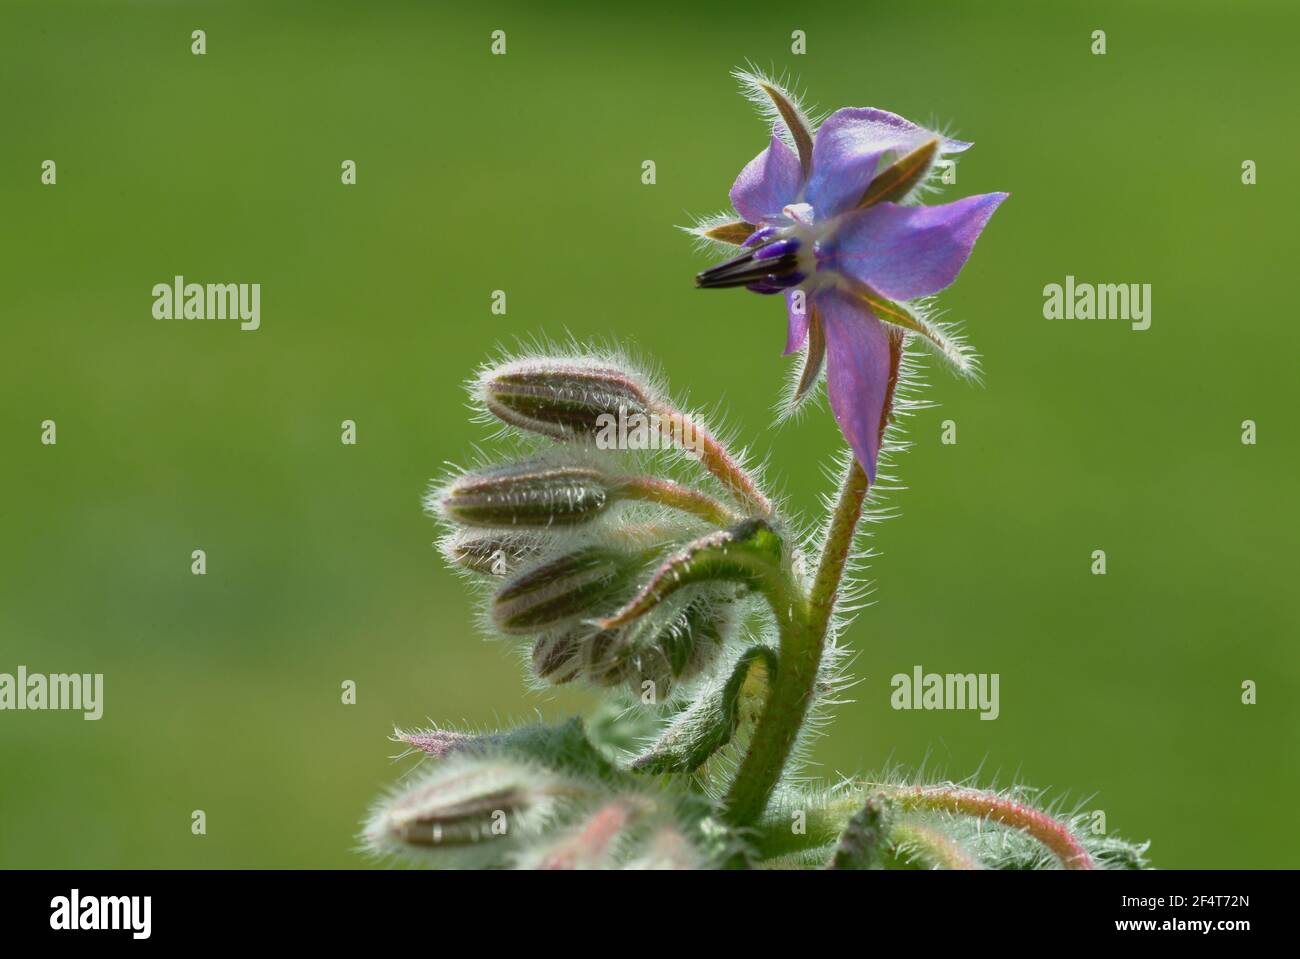 Borage, Borago officinalis, cucumber herb, a plant belonging to the broadleaf family, used as a spice and medicinal plant  /  Borretsch, Borago offici Stock Photo